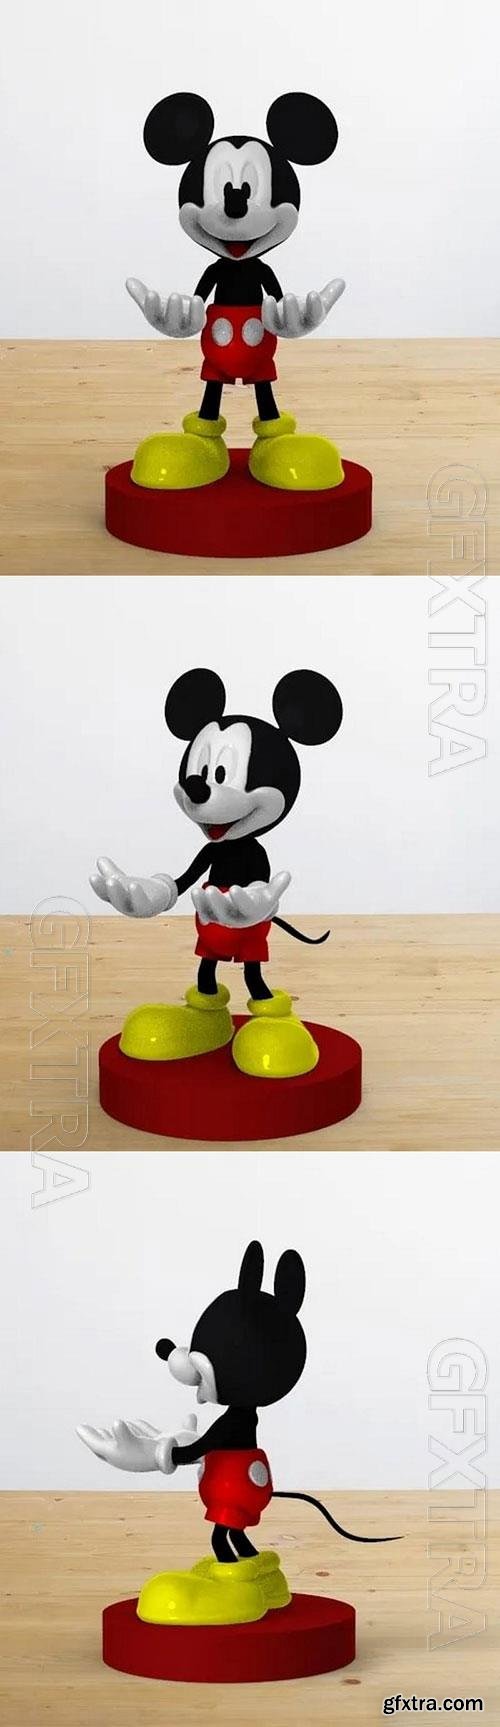 Print Model Smartphone Stand Mickey Mouse in 3D